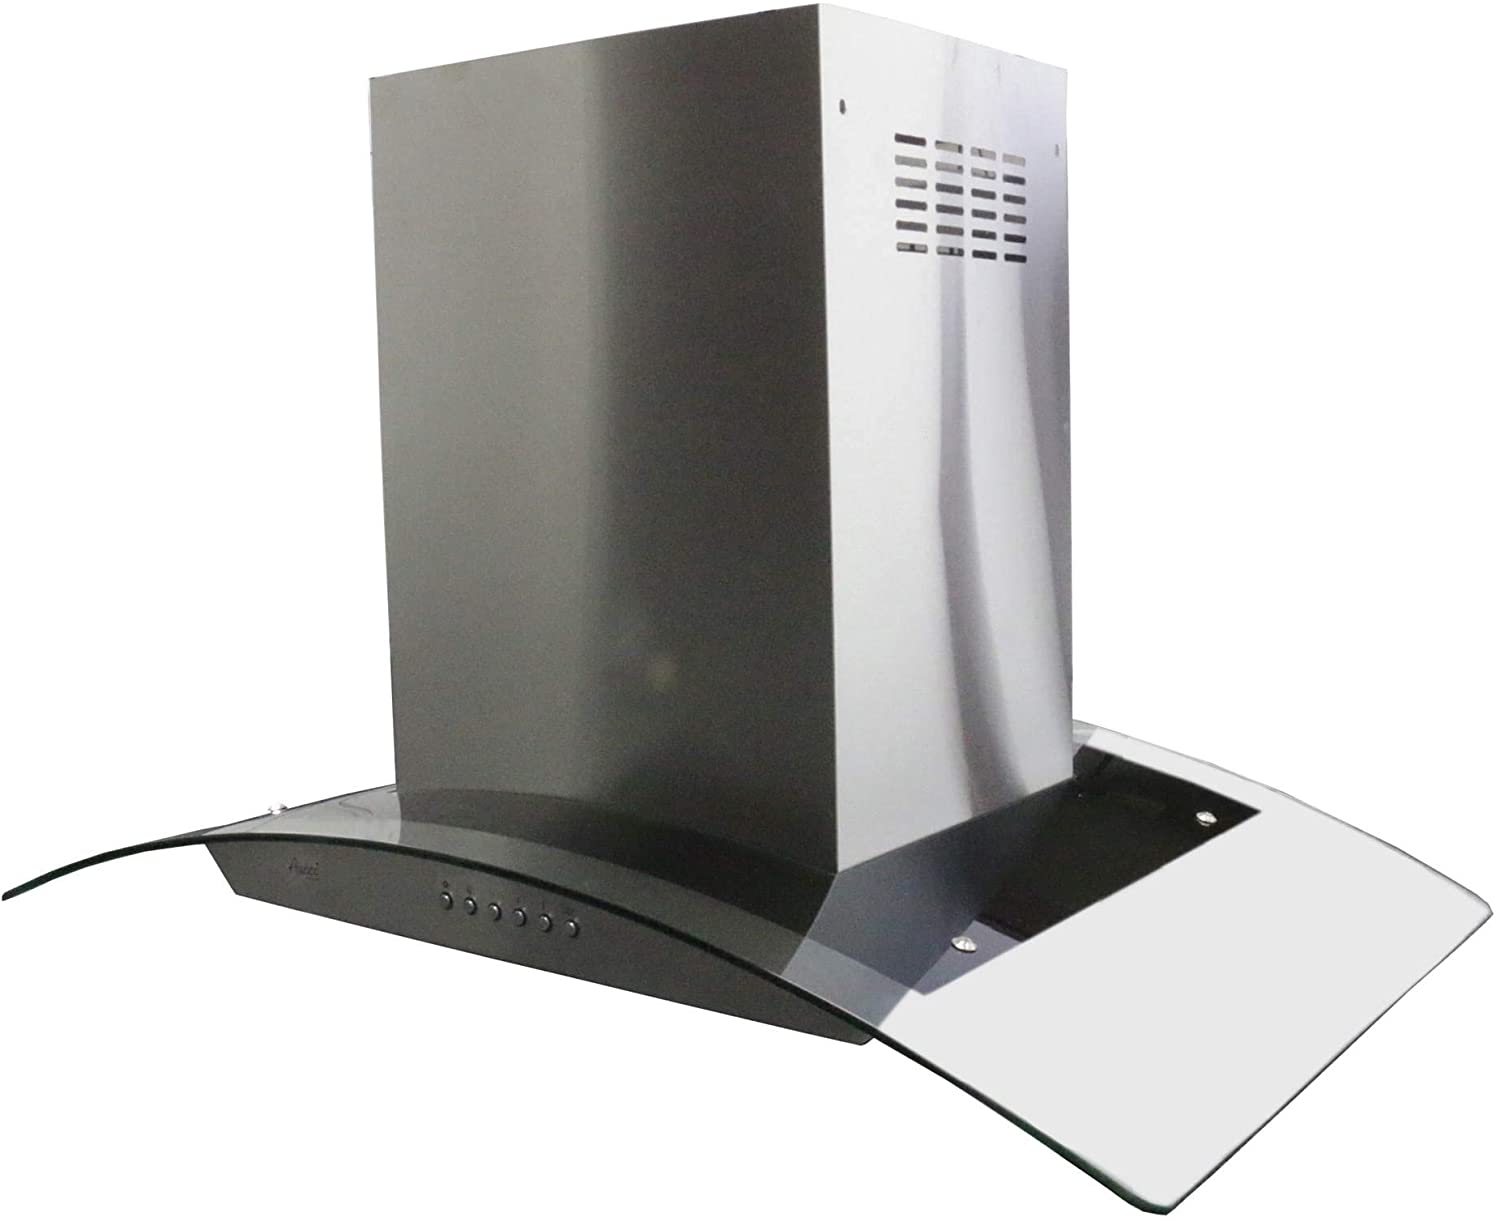 Awoco RH-ISG-36 6” Round Vent 1mm Thick Stainless Steel Island Mounted 4 Speeds 900CFM Range Hood with 4 LED Lights, Baffle Filter, Soft Touch Electronic Control Panel